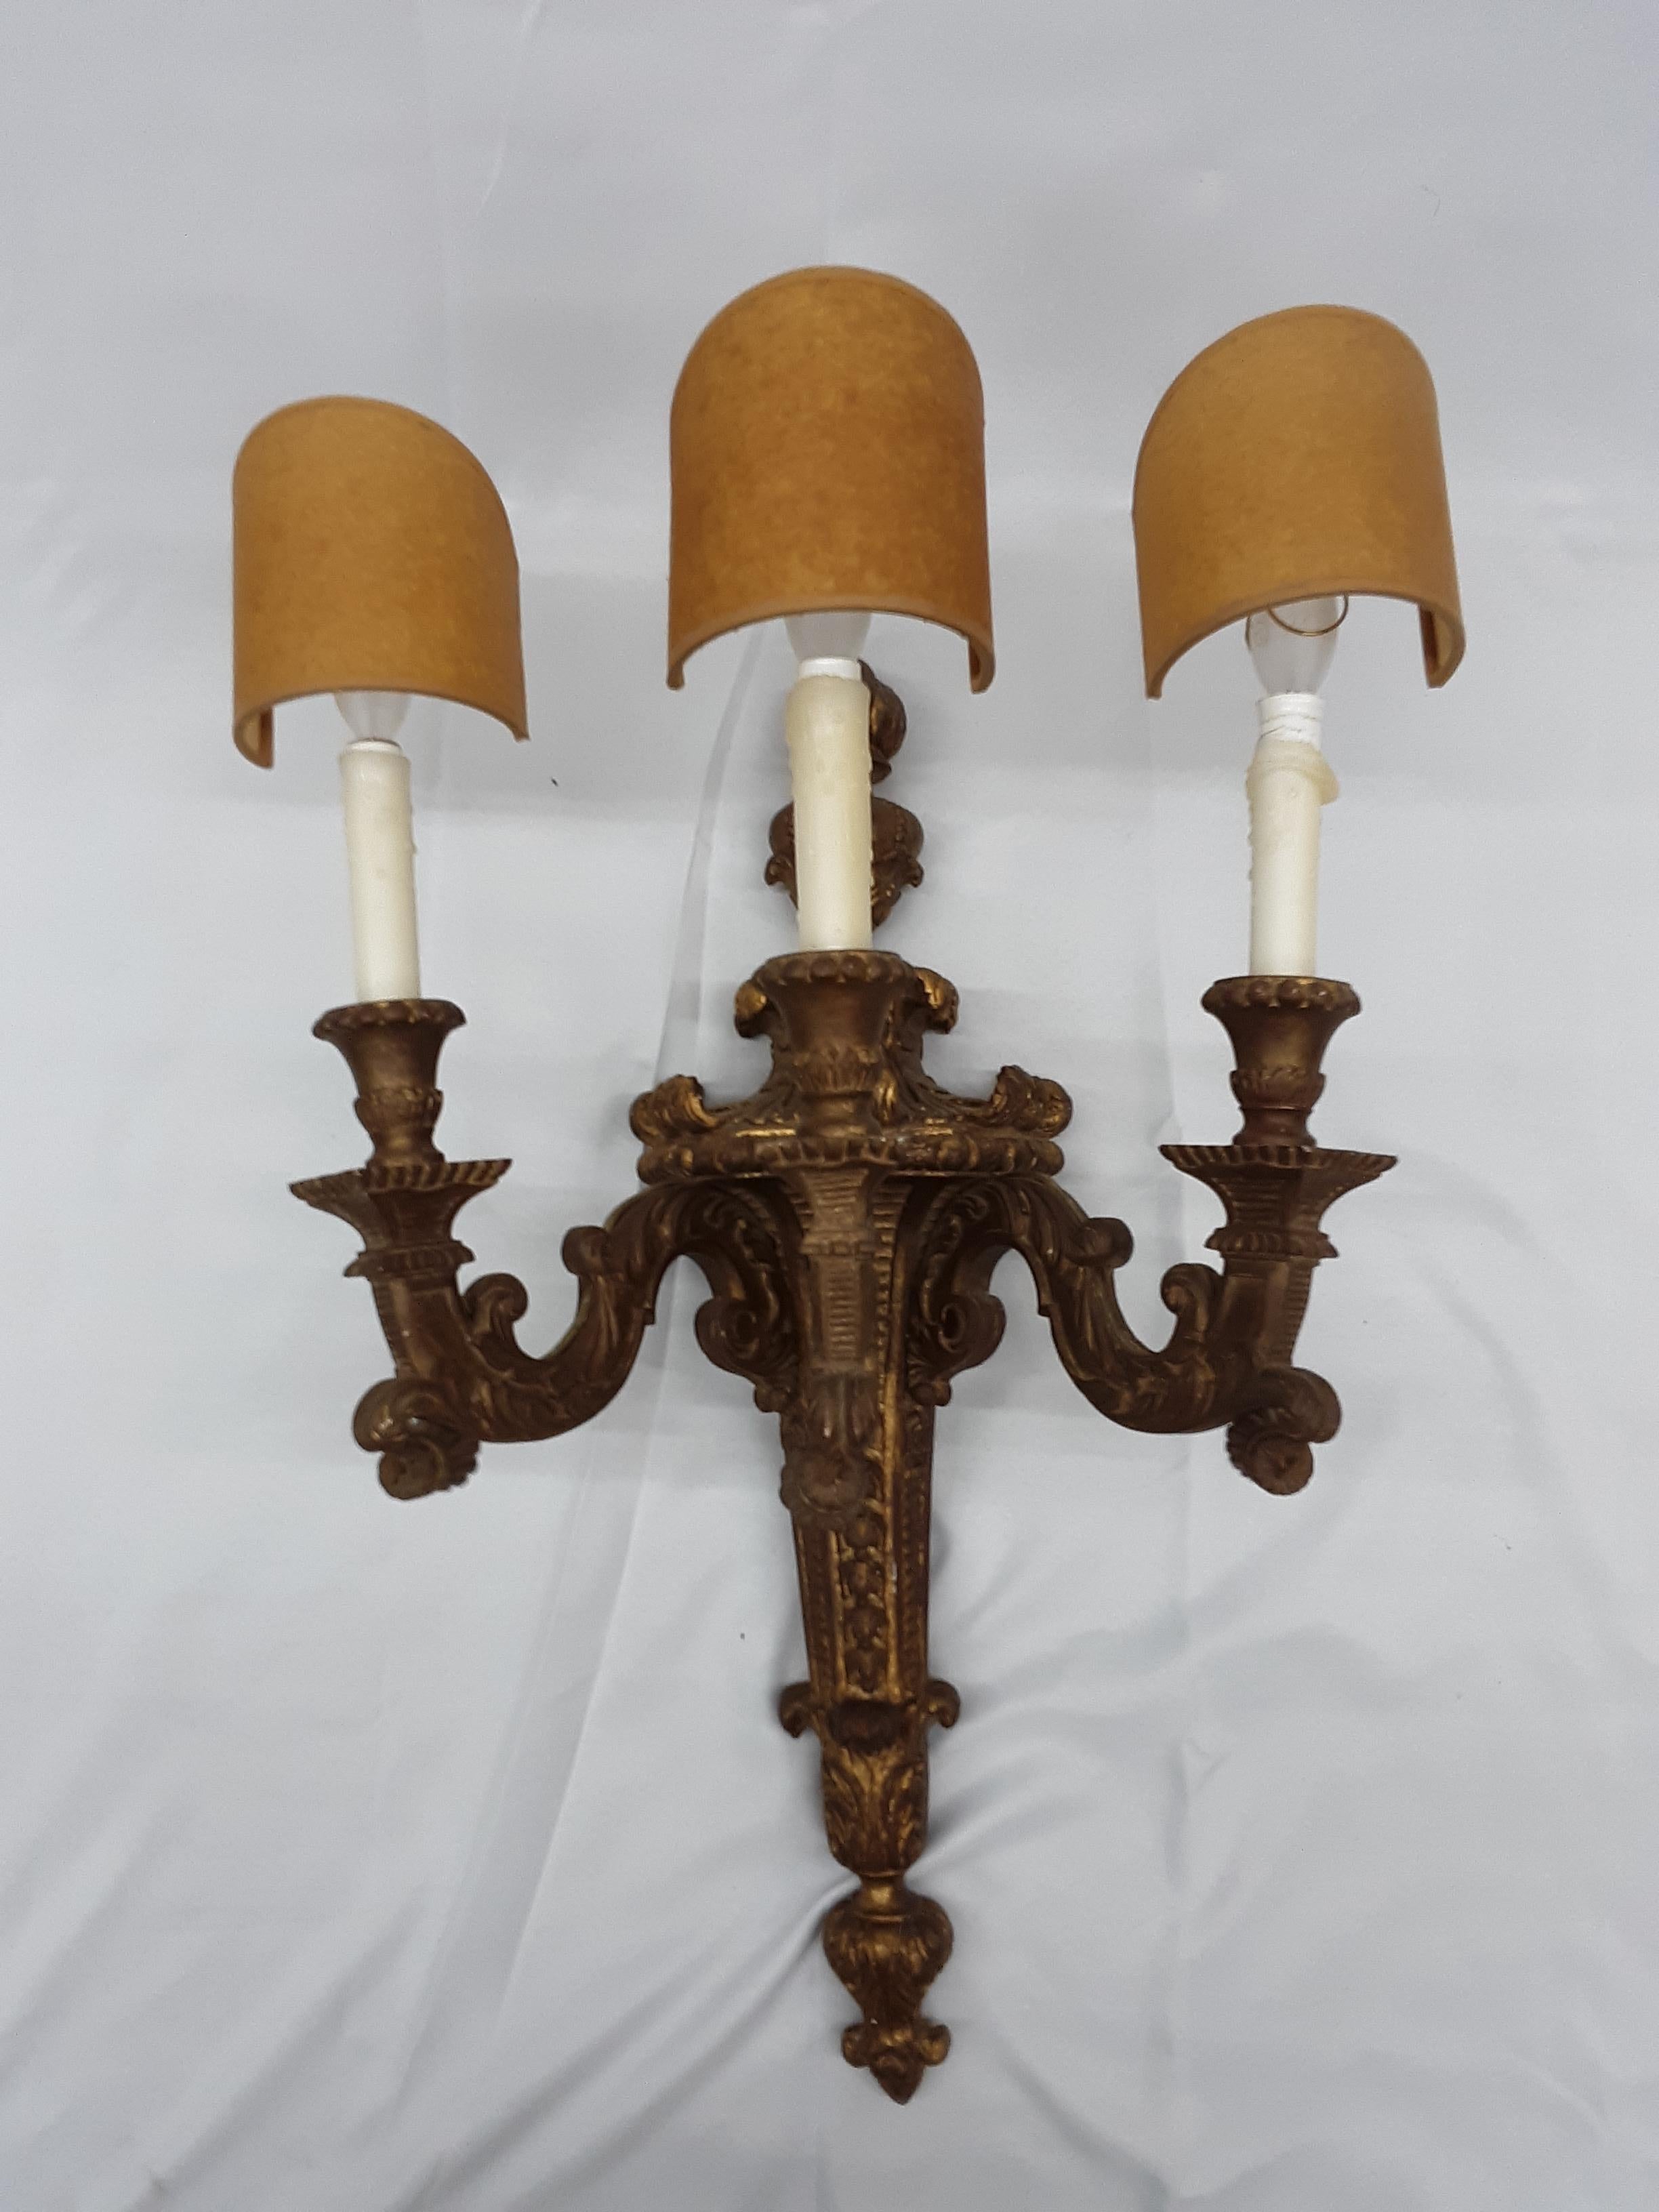 1950 Louis XVI French Electric Hard Plastic Wall Sconce with Elegant Covers In Good Condition For Sale In Lakewood, NJ